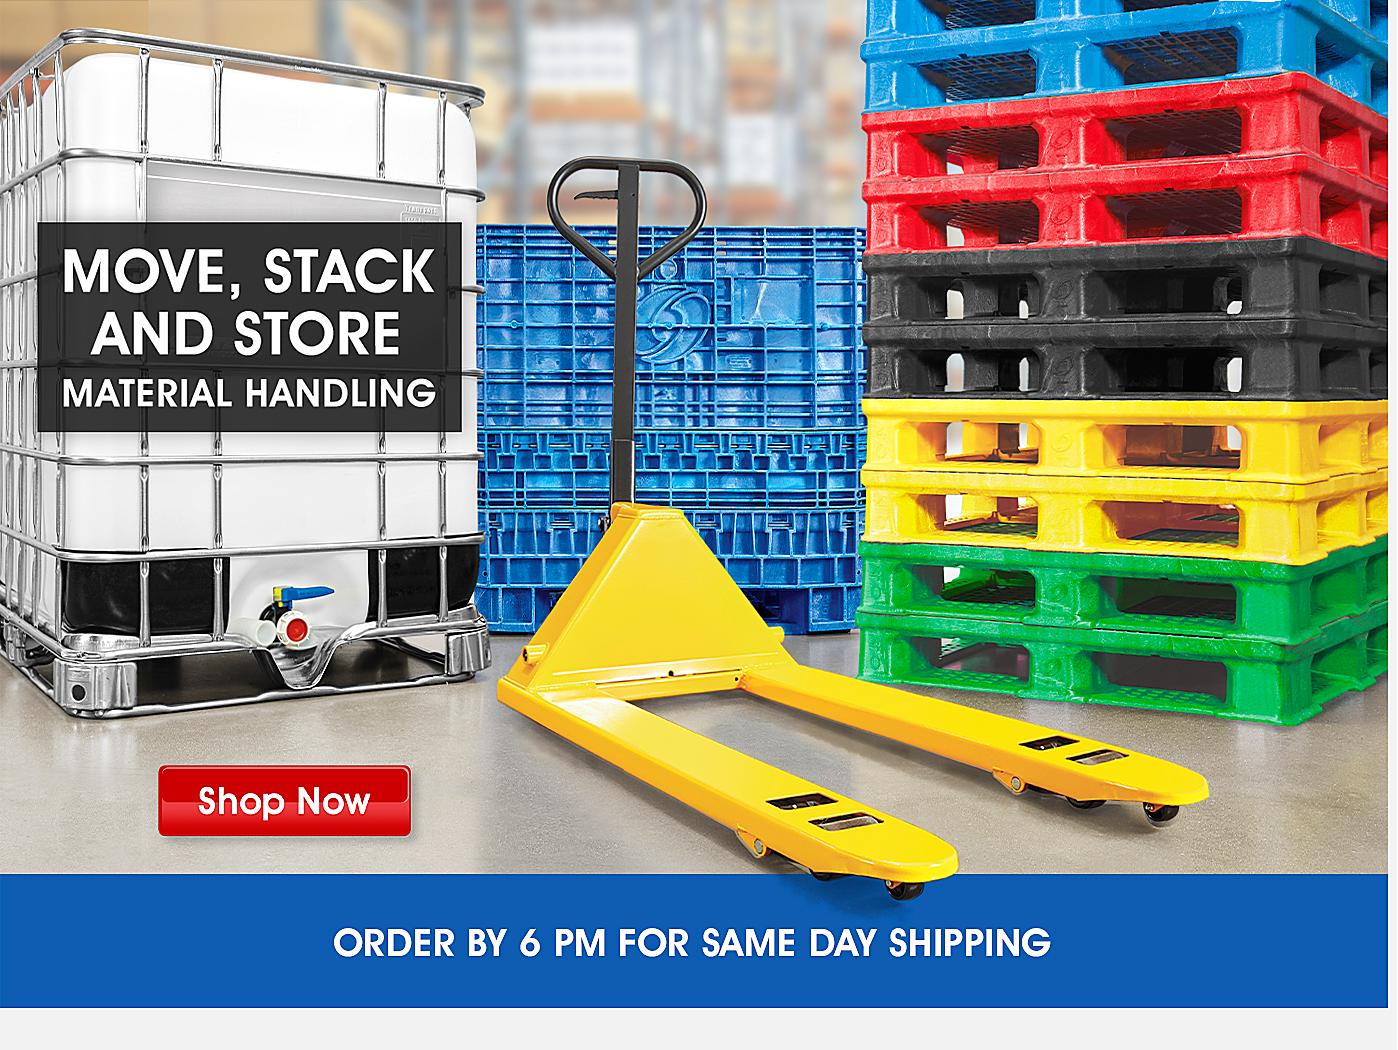 MOVE, STACK AND STORE - MATERIAL HANDLING. Shop Now. ORDER BY 6 PM FOR SAME DAY SHIPPING